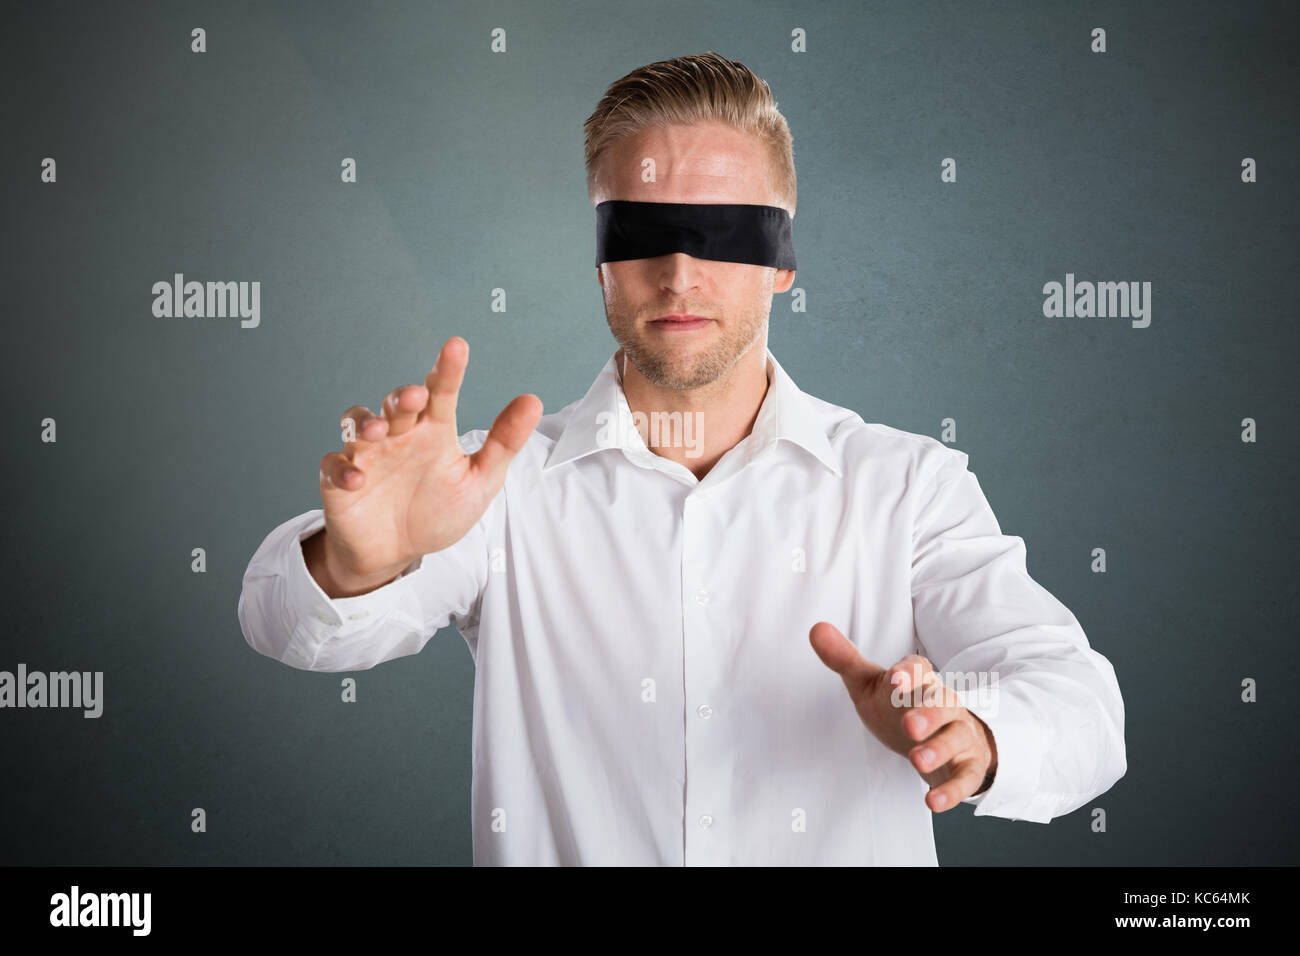 Young Blindfolded Lost Businessman Against Grey Background Stock Photo